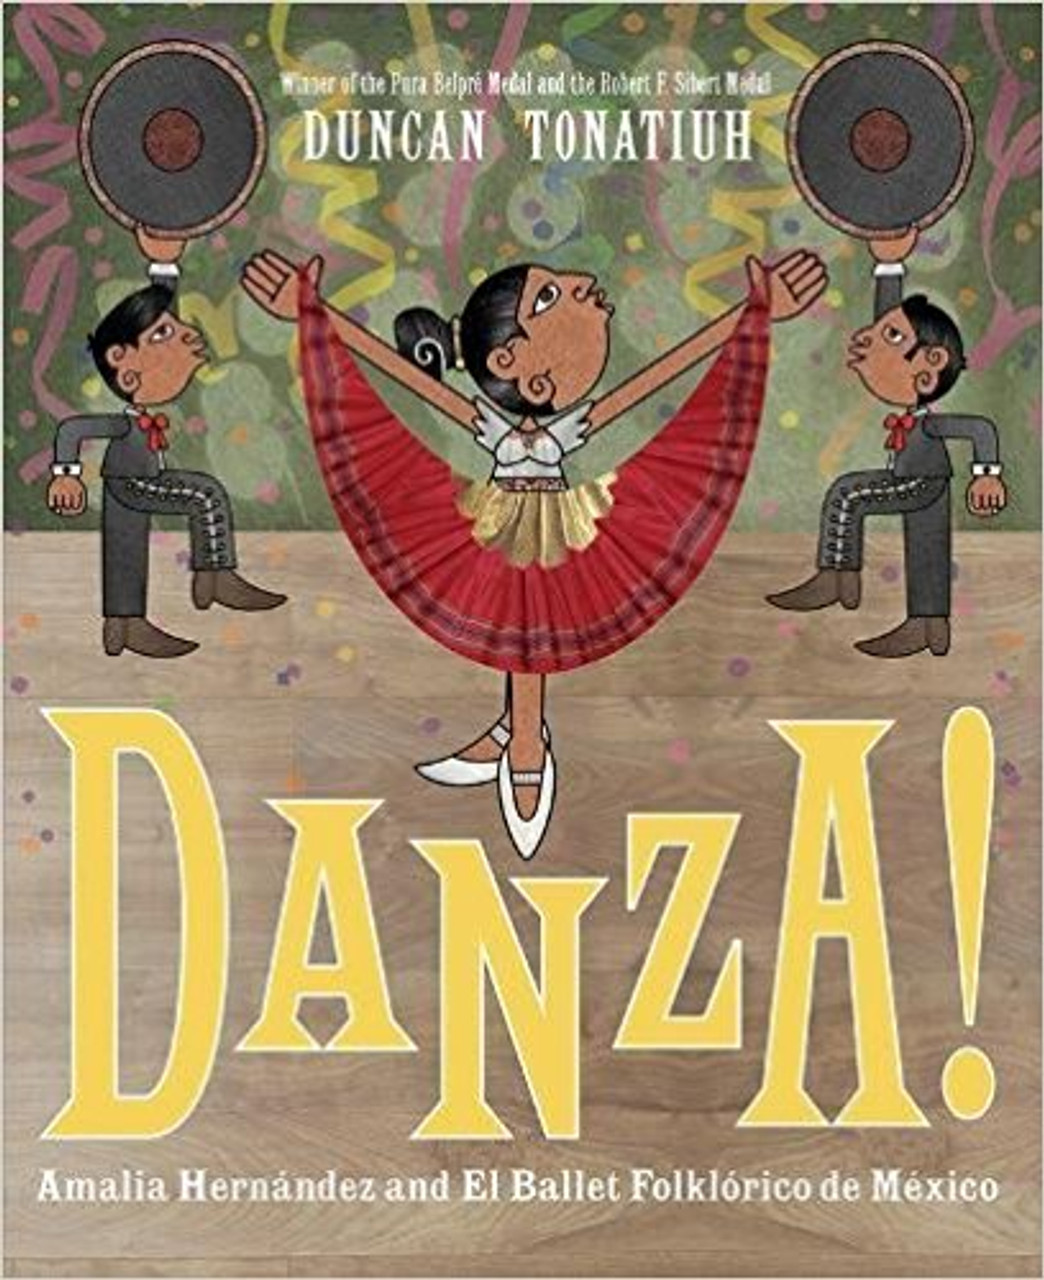 In celebration of the 100th anniversary of Hernandez's birth comes the first picture book about the famous dancer and choreographer, from an award-winning author and illustrator who tells the story of the founder of one of Mexico's most revered dance troupes. Full color.